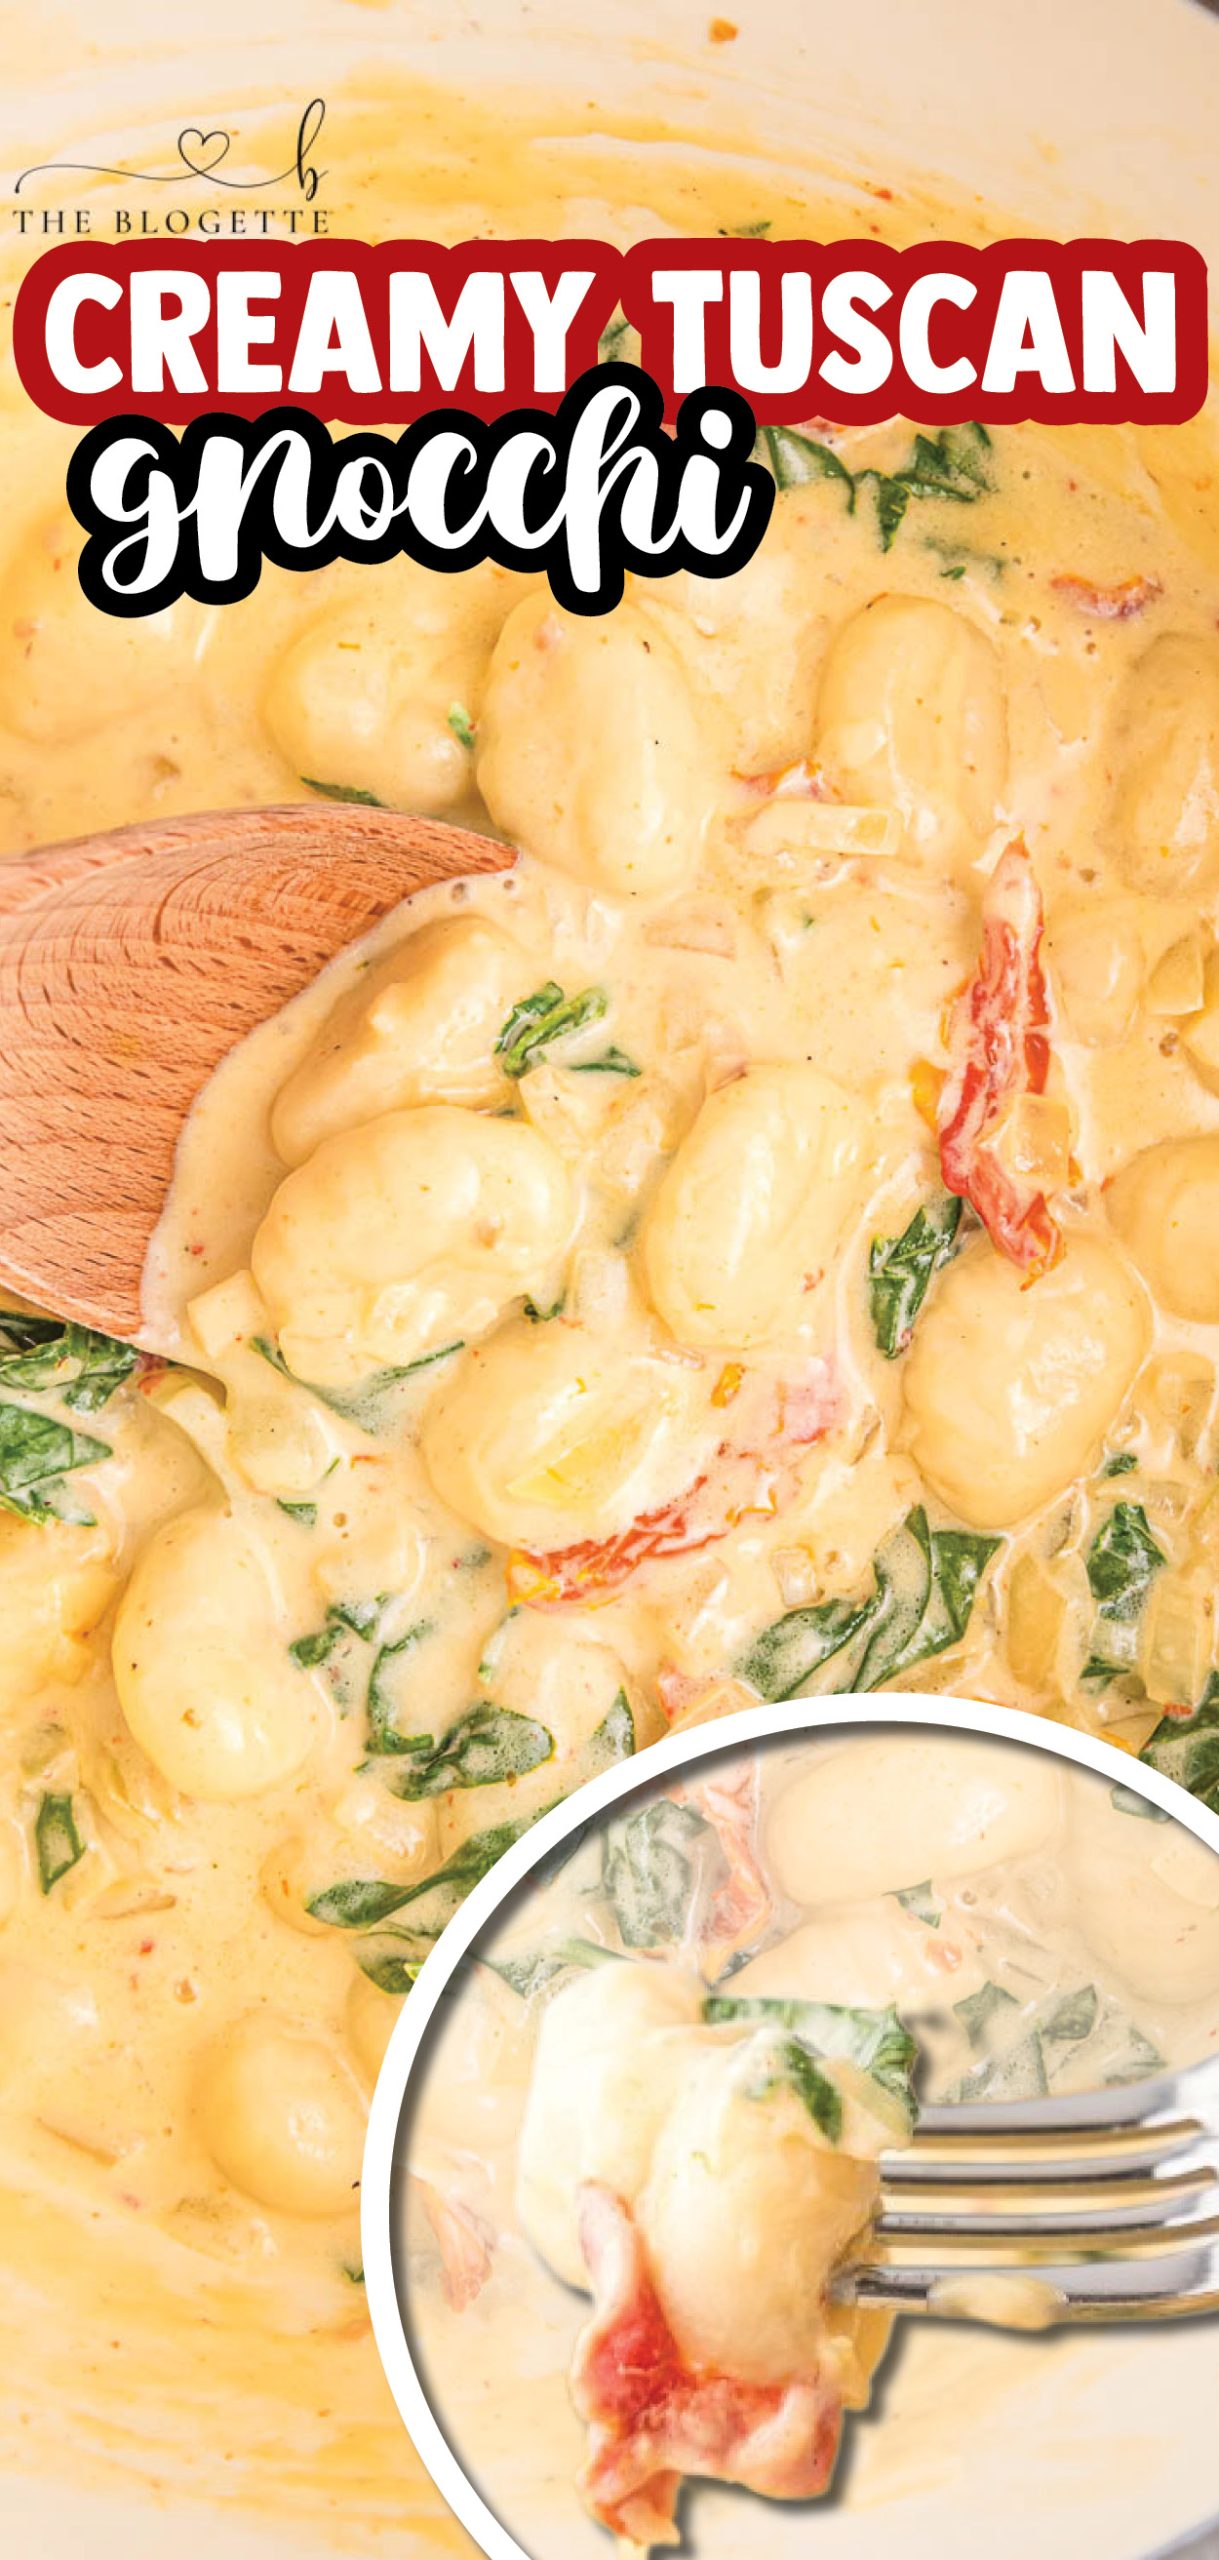 Creamy Tuscan Gnocchi is the perfect dinner when you’re in the mood for comfort food. Soft gnocchi cooked in a cream sauce with sun-dried tomatoes, spinach, and garlic. 